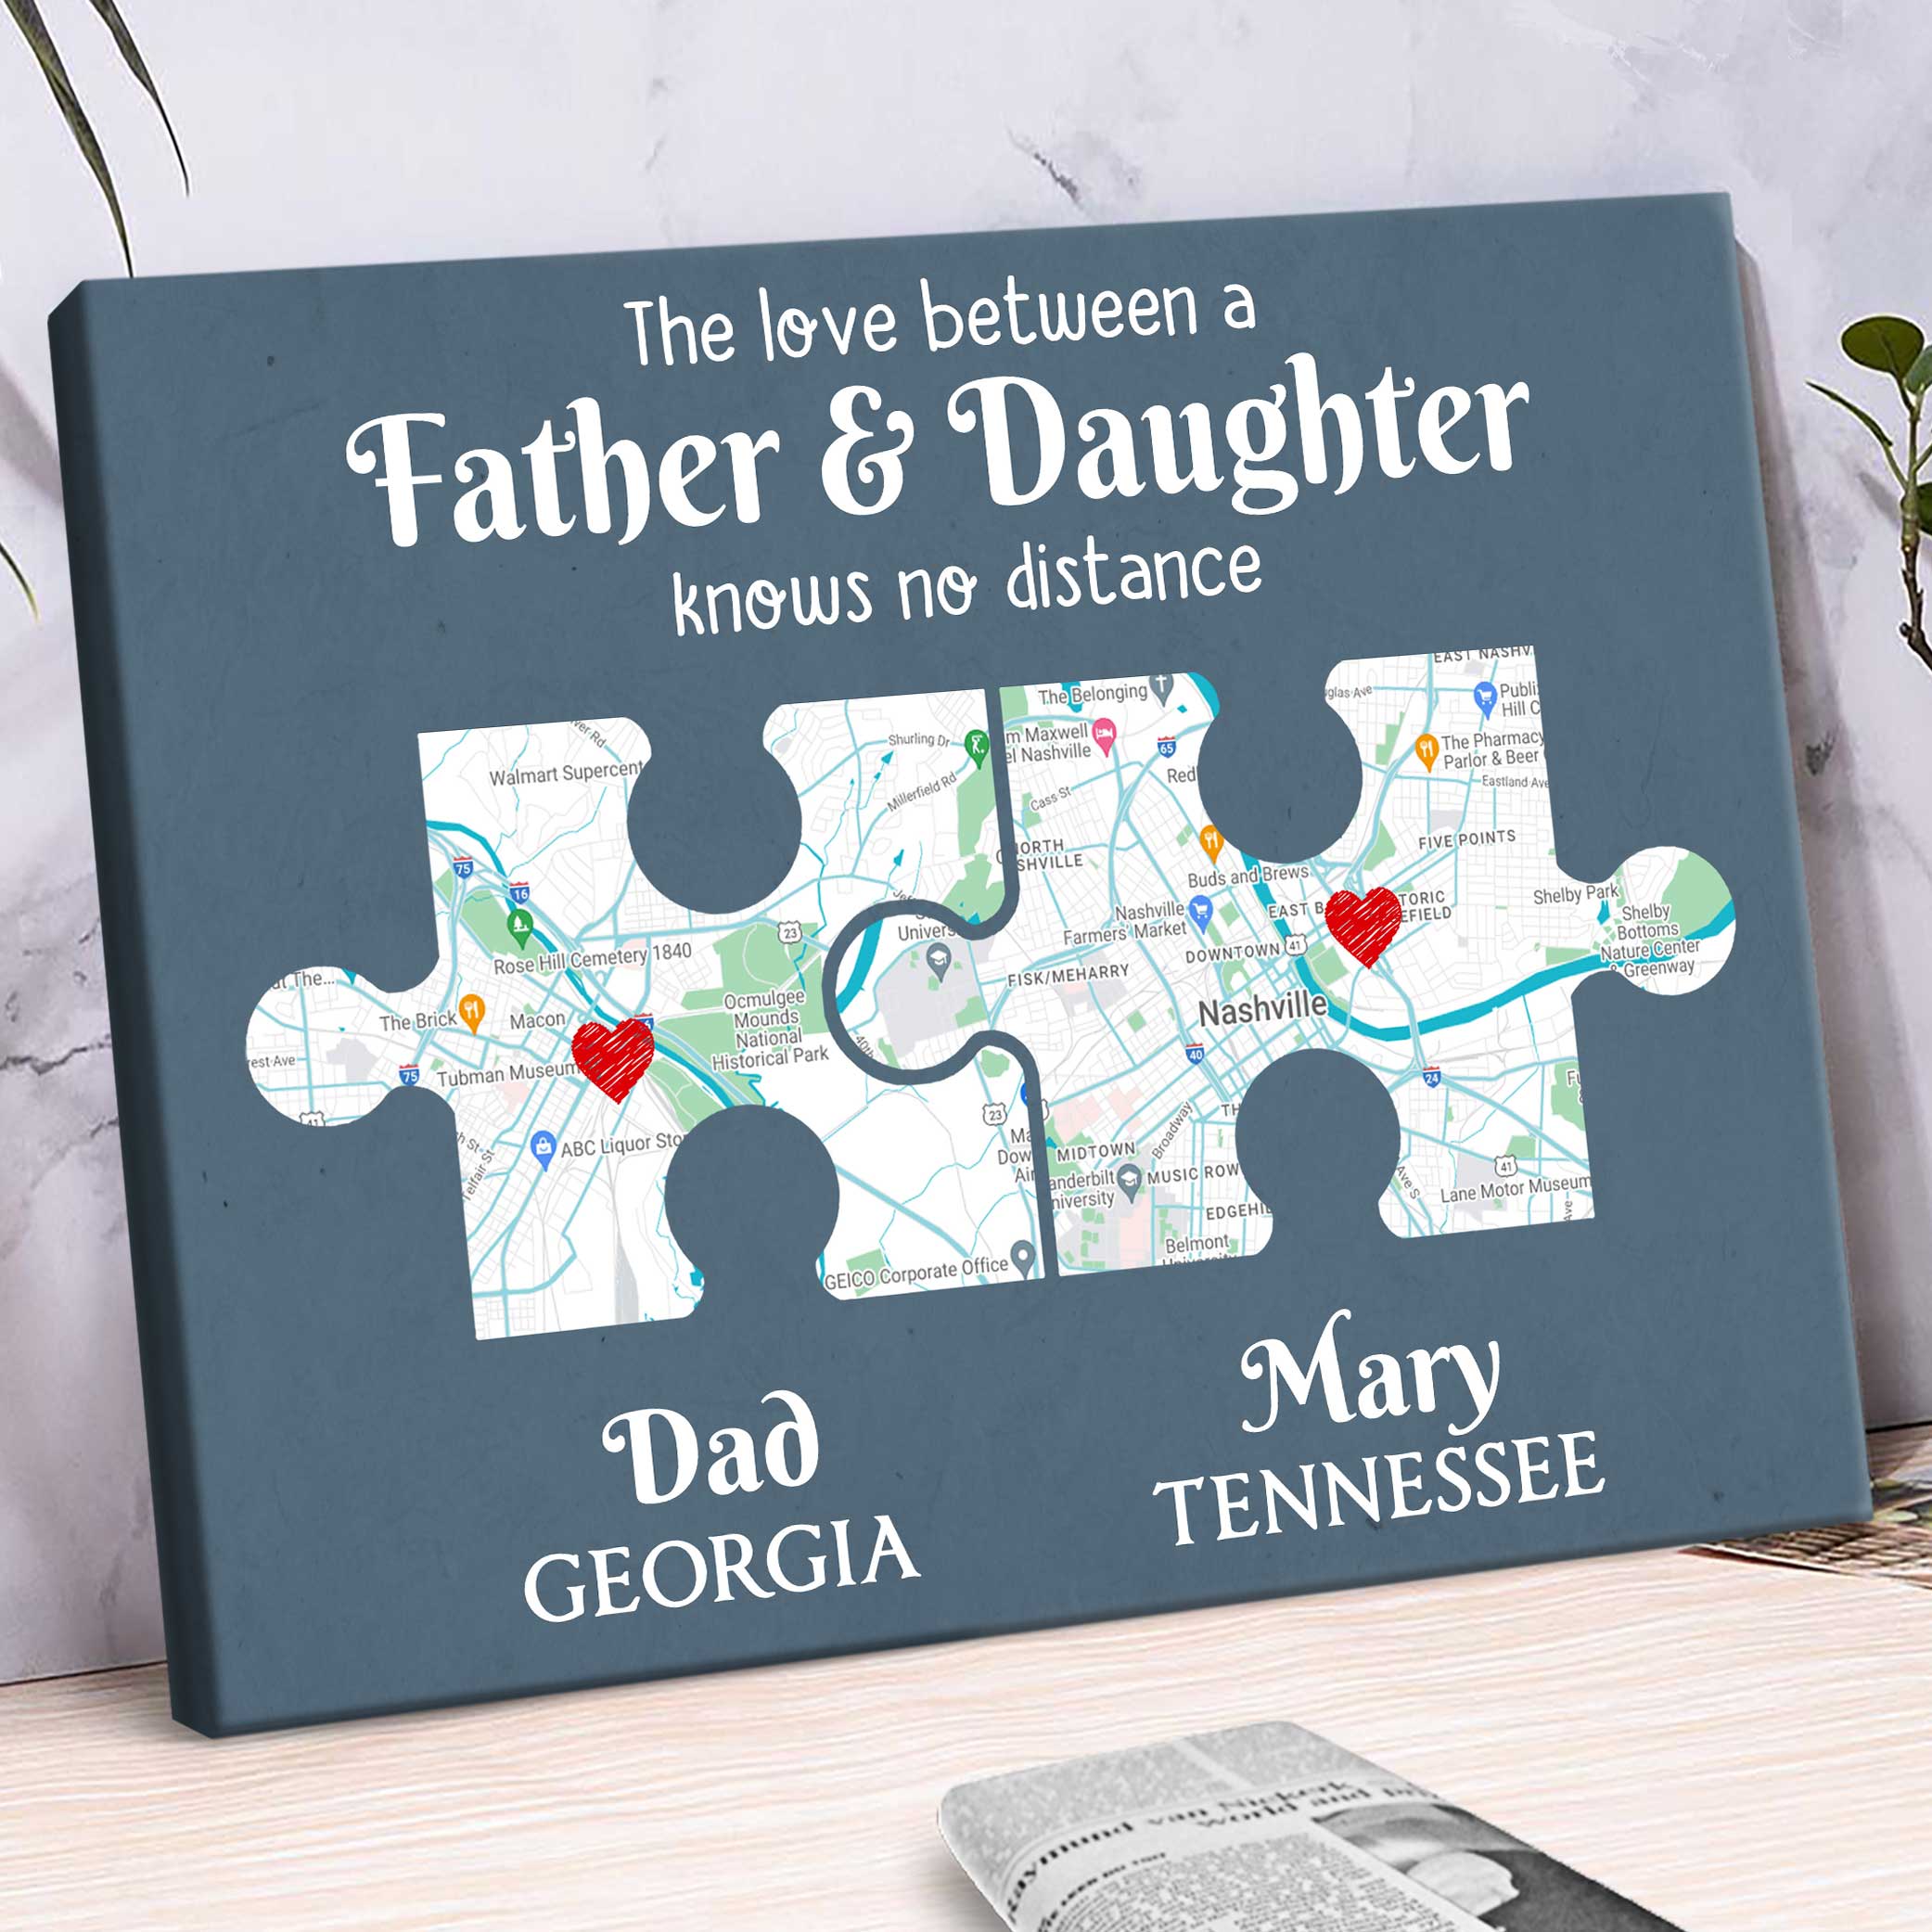 https://benicee.com/wp-content/uploads/2022/09/af72a7b7-3a4b-11ed-94d0-366e99cc6050__Personalized-Long-Distance-Father-and-Daughter-Gift-Christmas-Gift-for-Dad-Daughter-Moving-Out-Gift-4.jpg